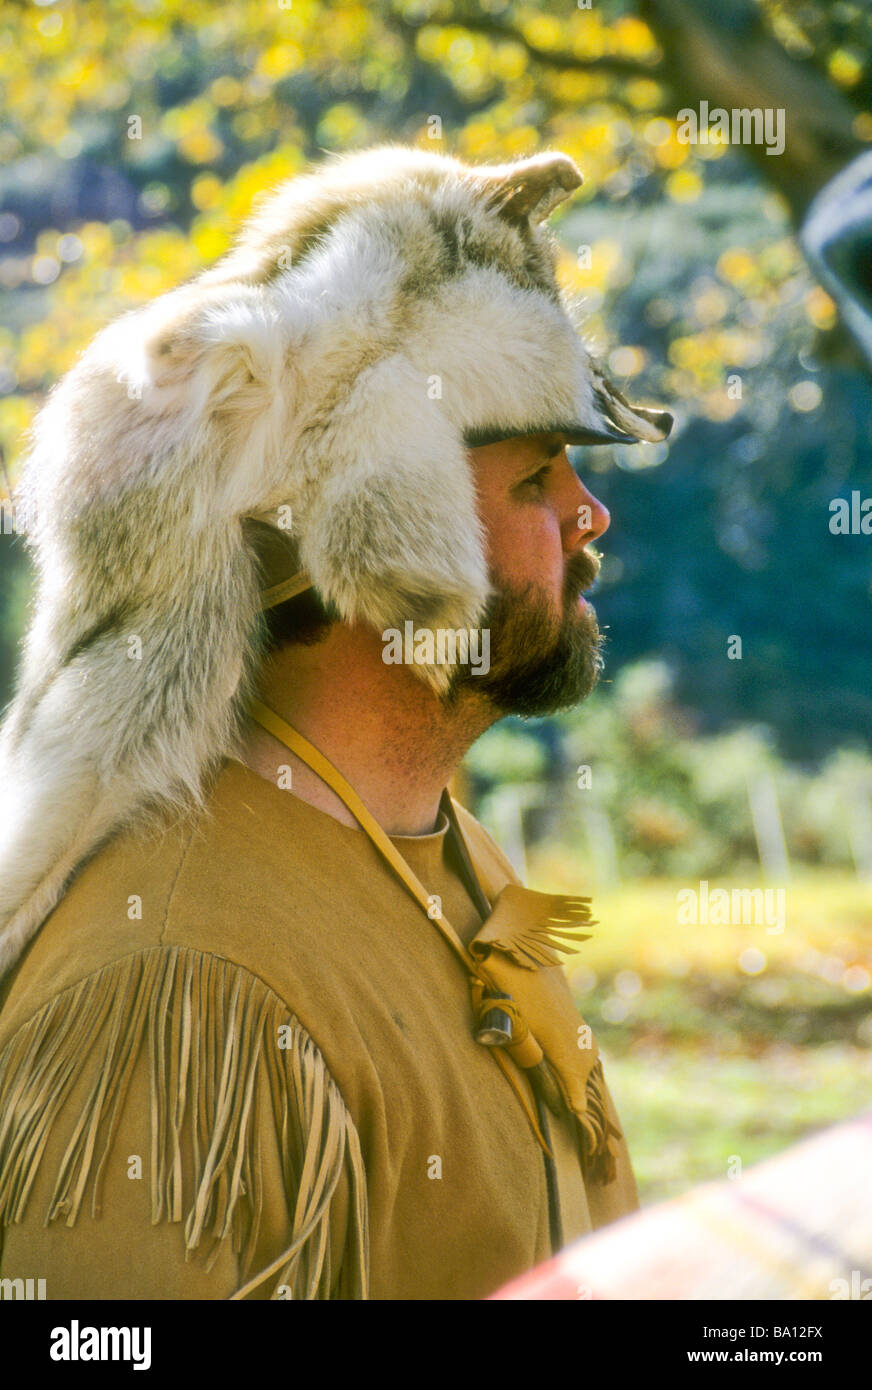 man animal skin hat wear early American costume pioneer mountain man rustic  west history historical recreate recreation past Stock Photo - Alamy